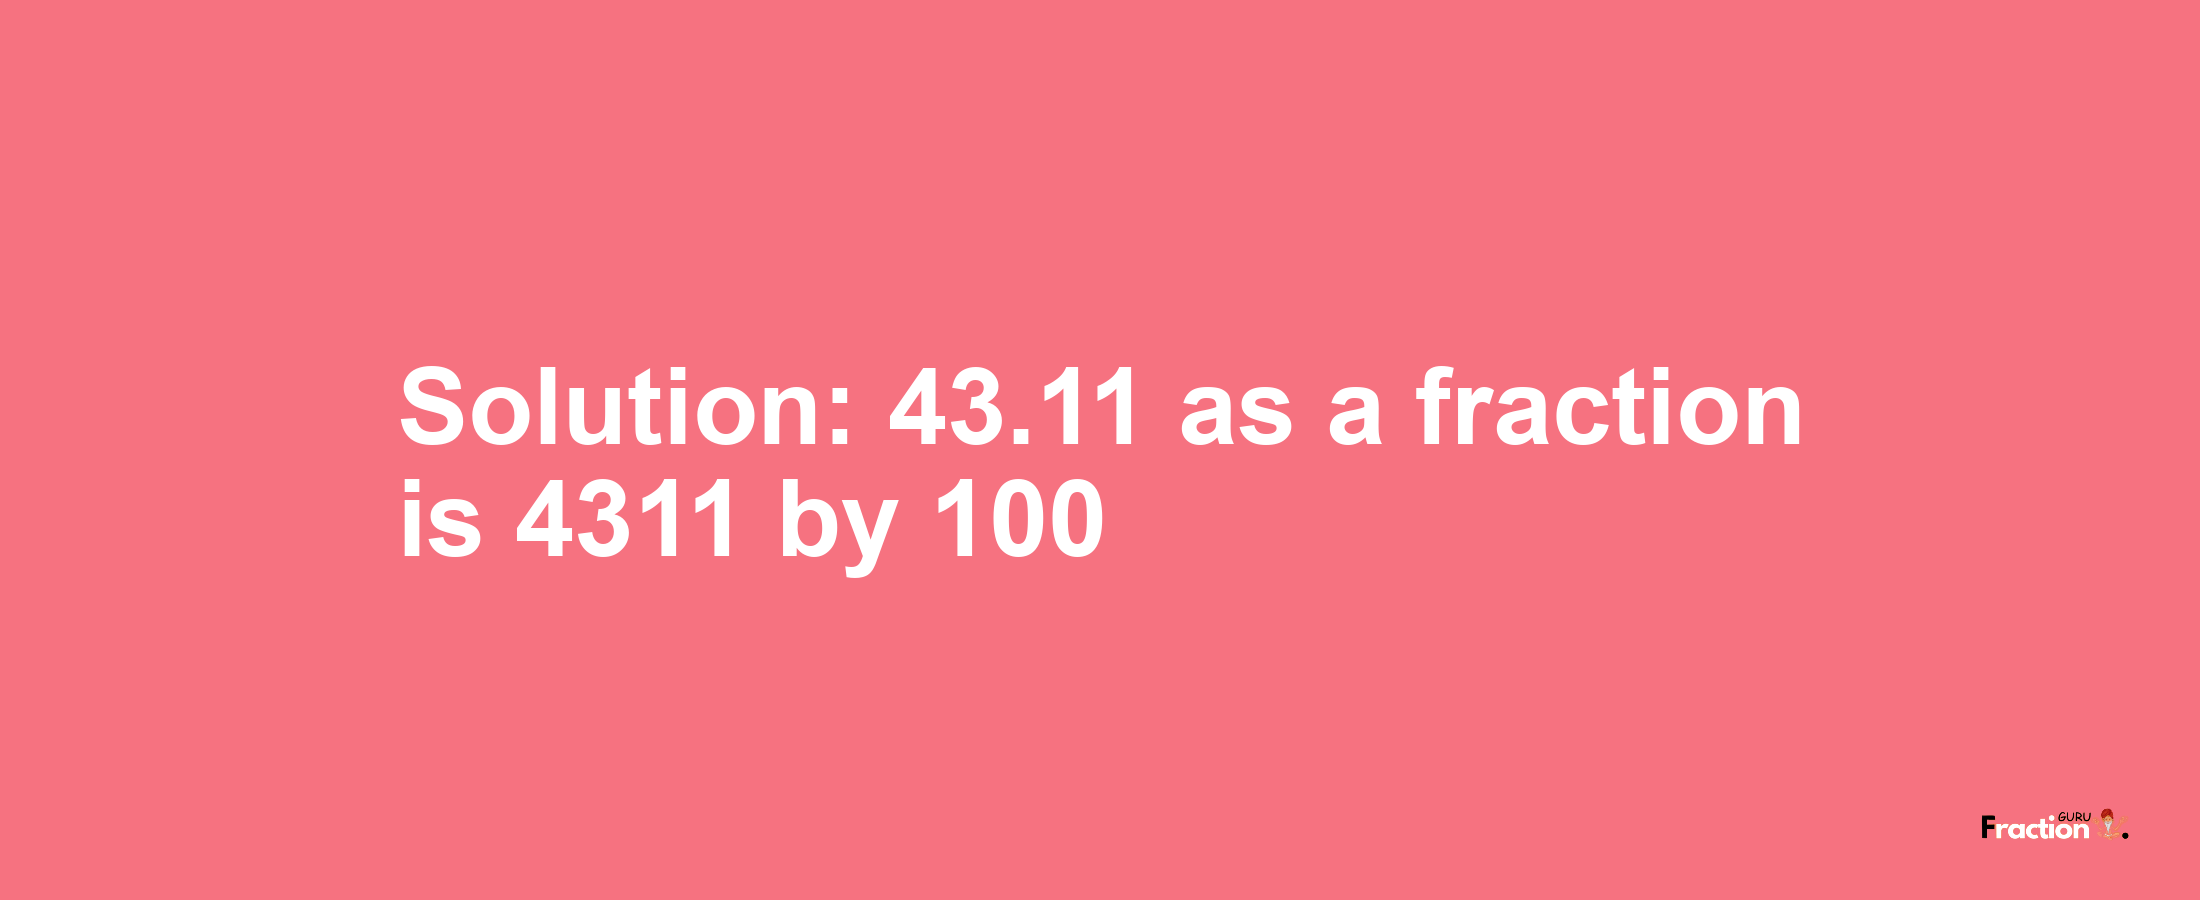 Solution:43.11 as a fraction is 4311/100